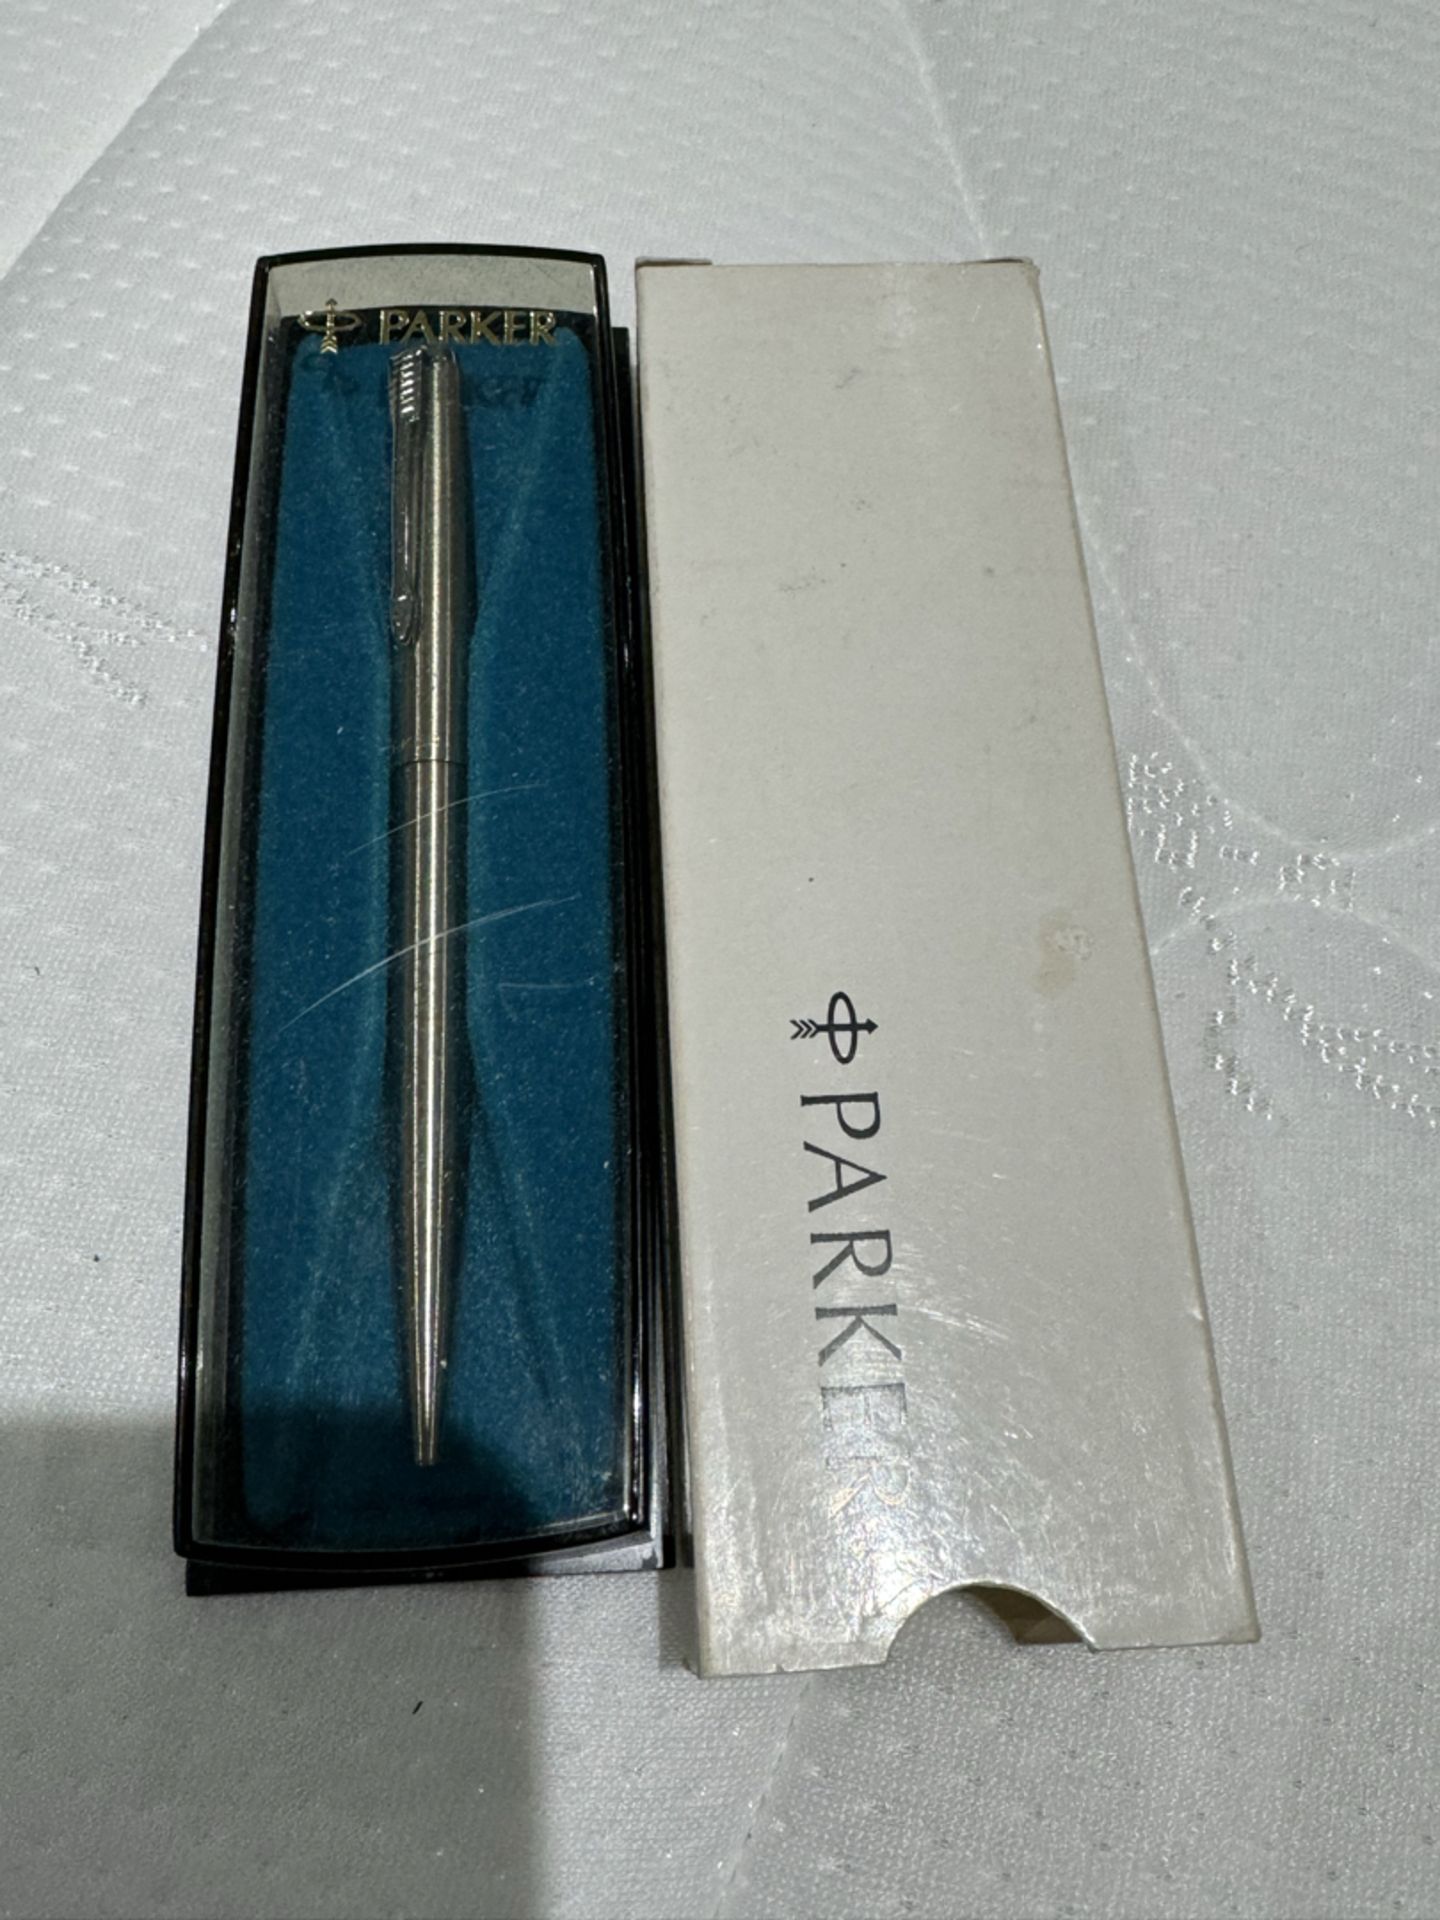 Vintage Parker Pen in Original Box - Looks new but some discolouration to packaging - Image 3 of 3